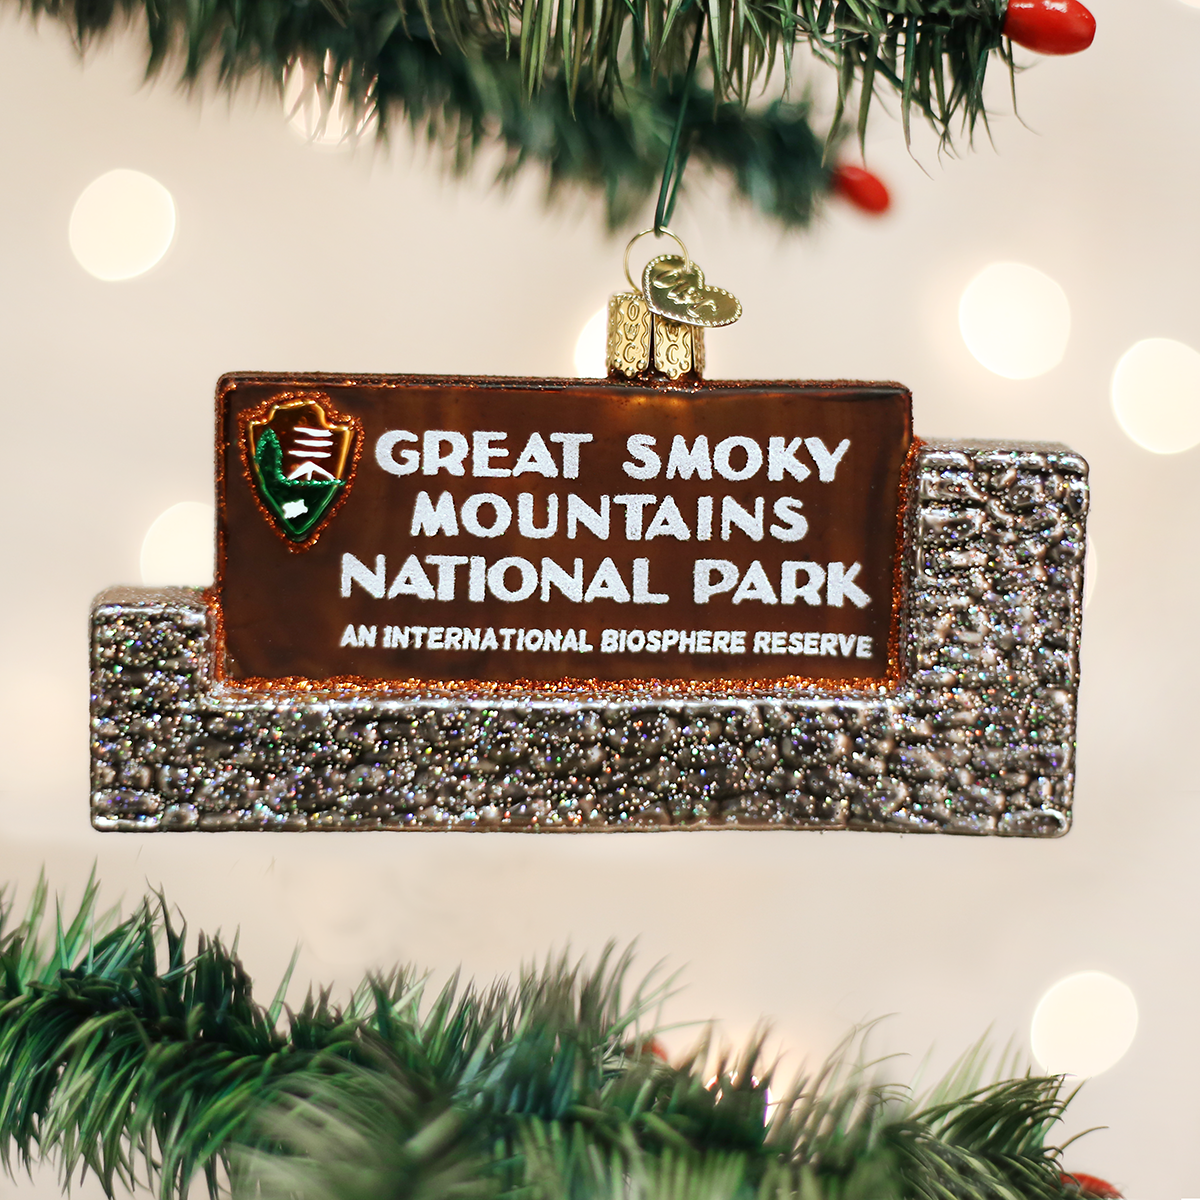 https://media.citylightscollectibles.com/pub/media/catalog/product/rdi/rdi/old-world-xmas-36189-great-smoky-mountain-national_1.png?width=240&height=300&store=default&image-type=small_image